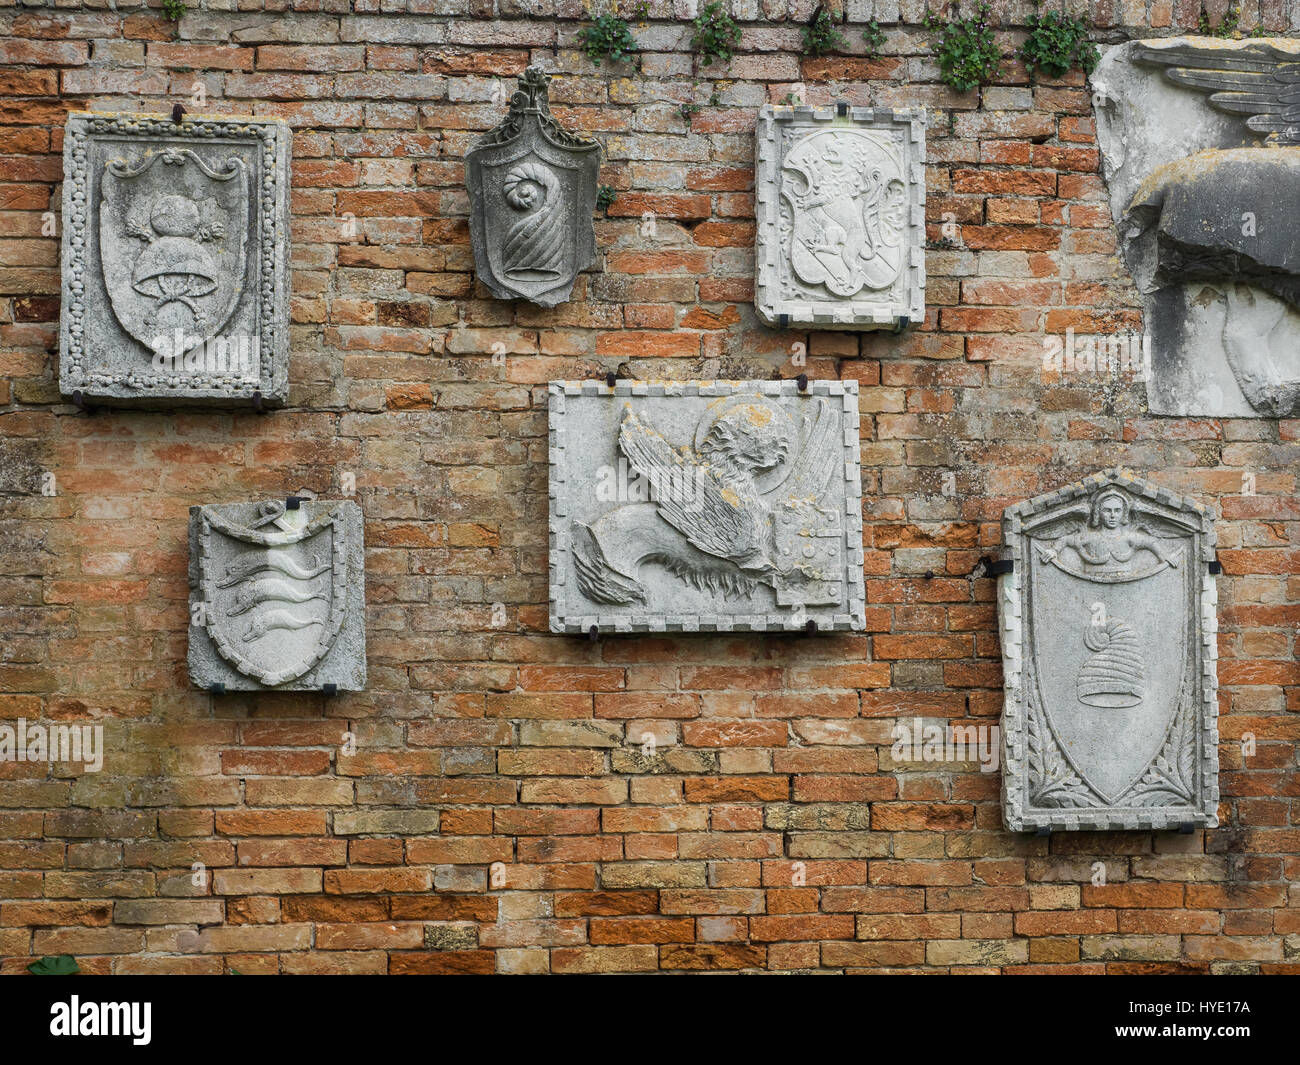 Carved wall plaques of various designs on wall on the island of Torcello, the oldest settlement in the Venetian lagoon, Venice, Italy Stock Photo